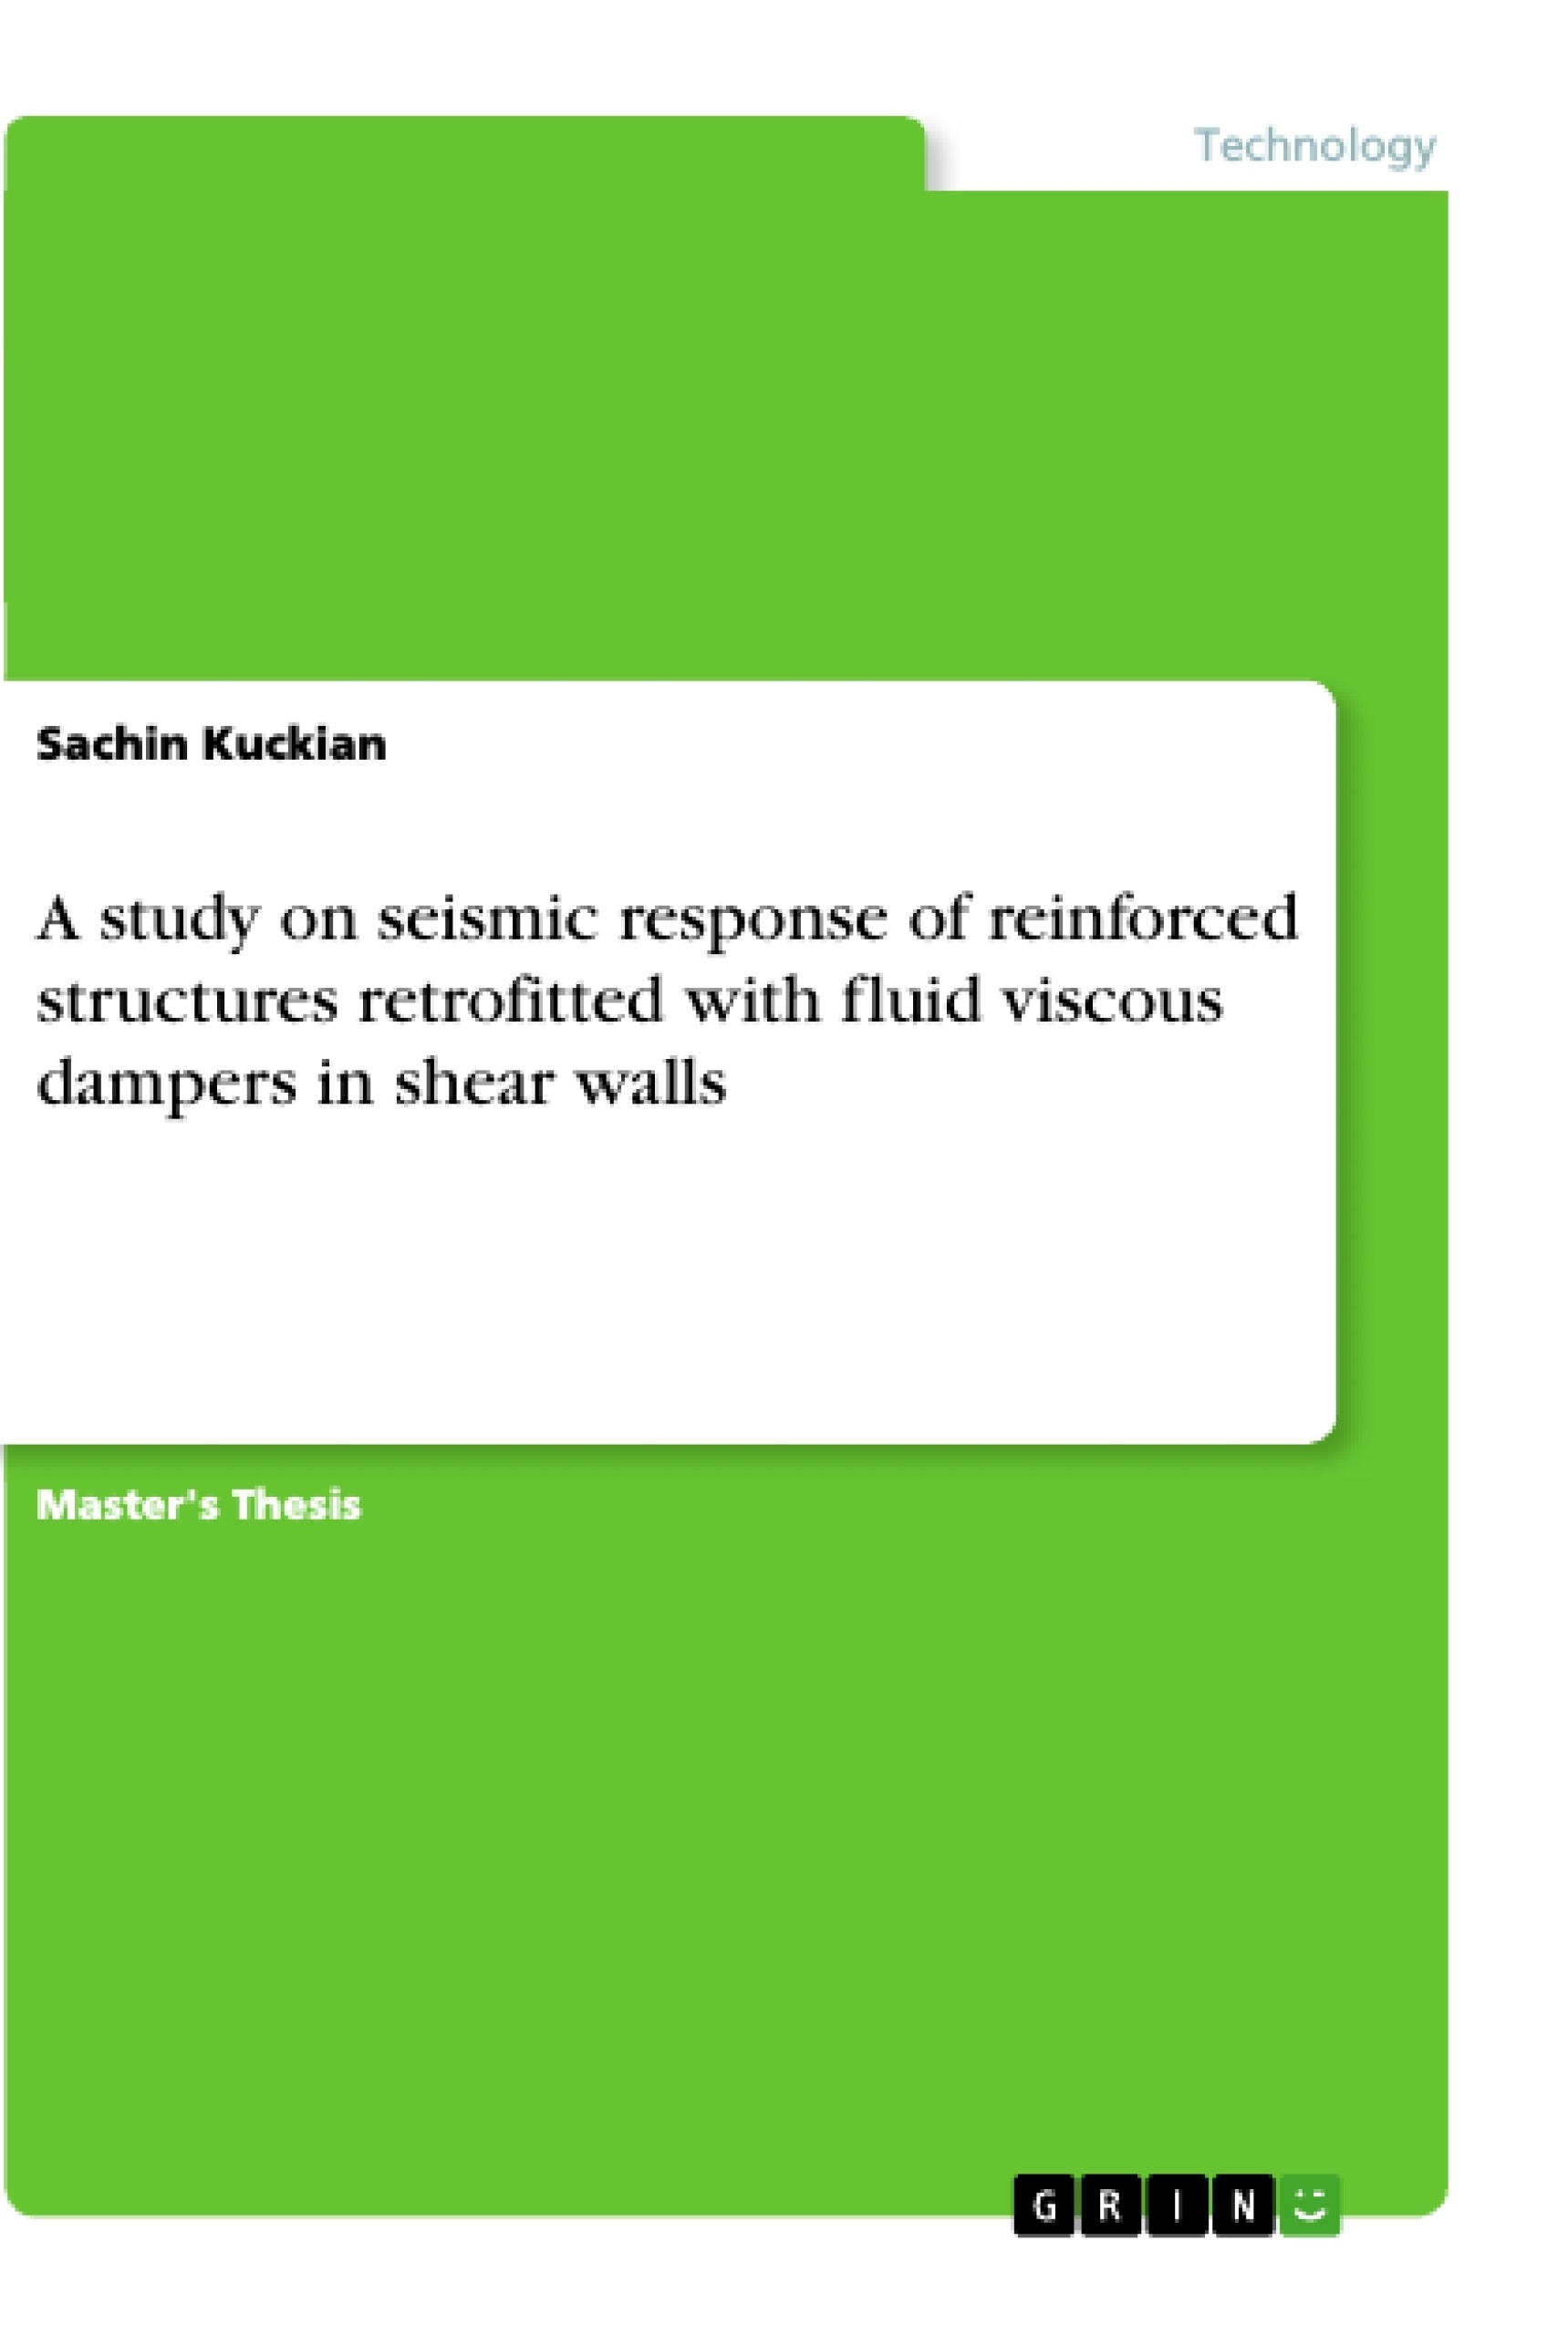 Título: A study on seismic response of reinforced structures retrofitted with fluid viscous dampers in shear walls